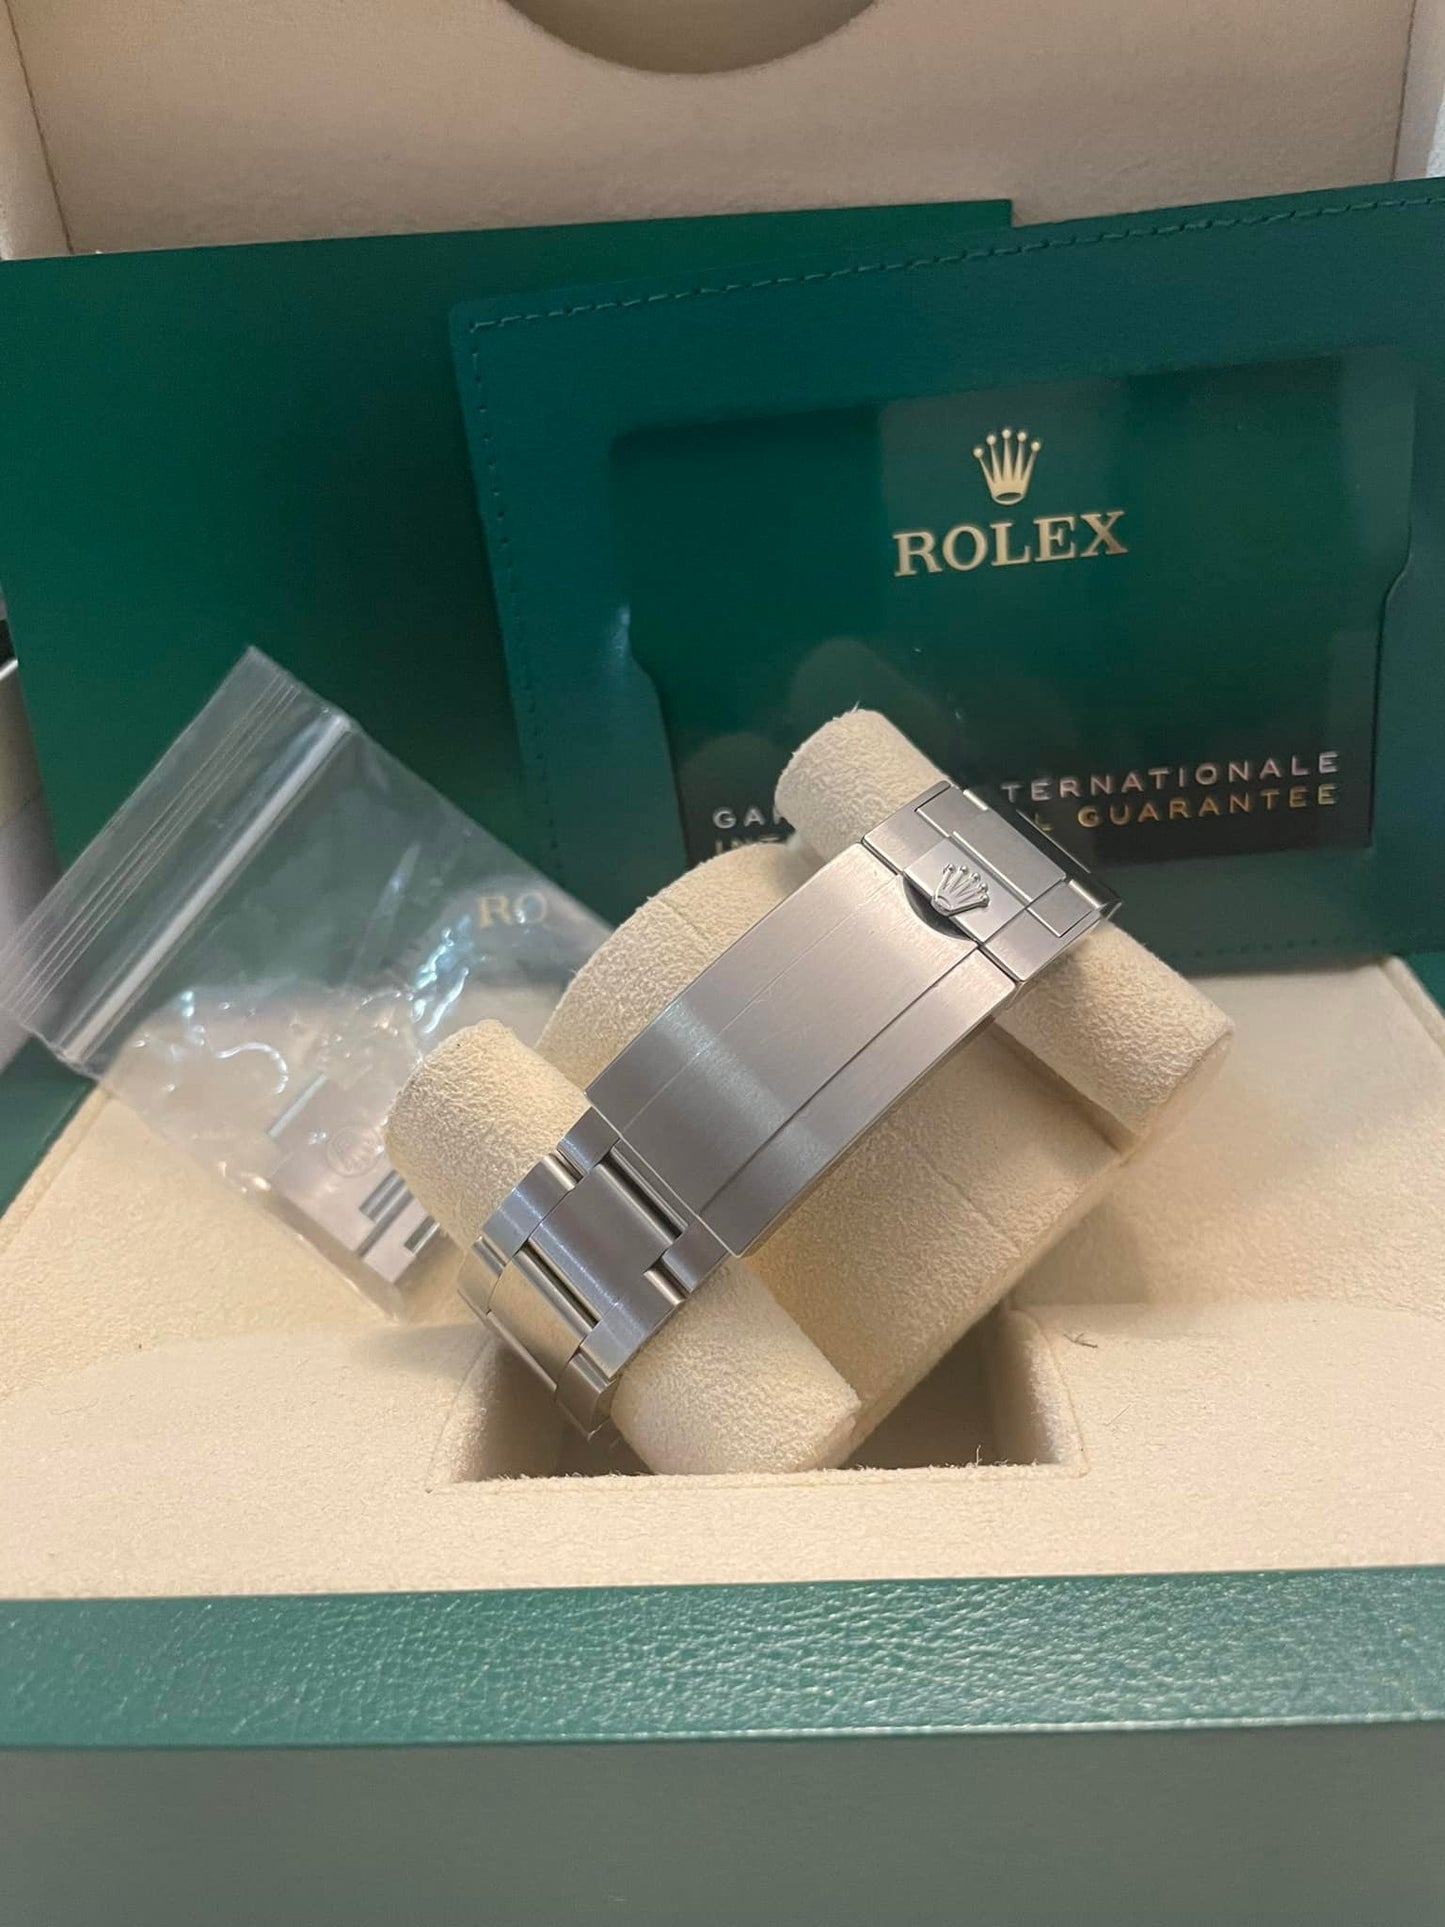 Rolex Sea-Dweller 126600 Red Letter SD43 Box + Papers